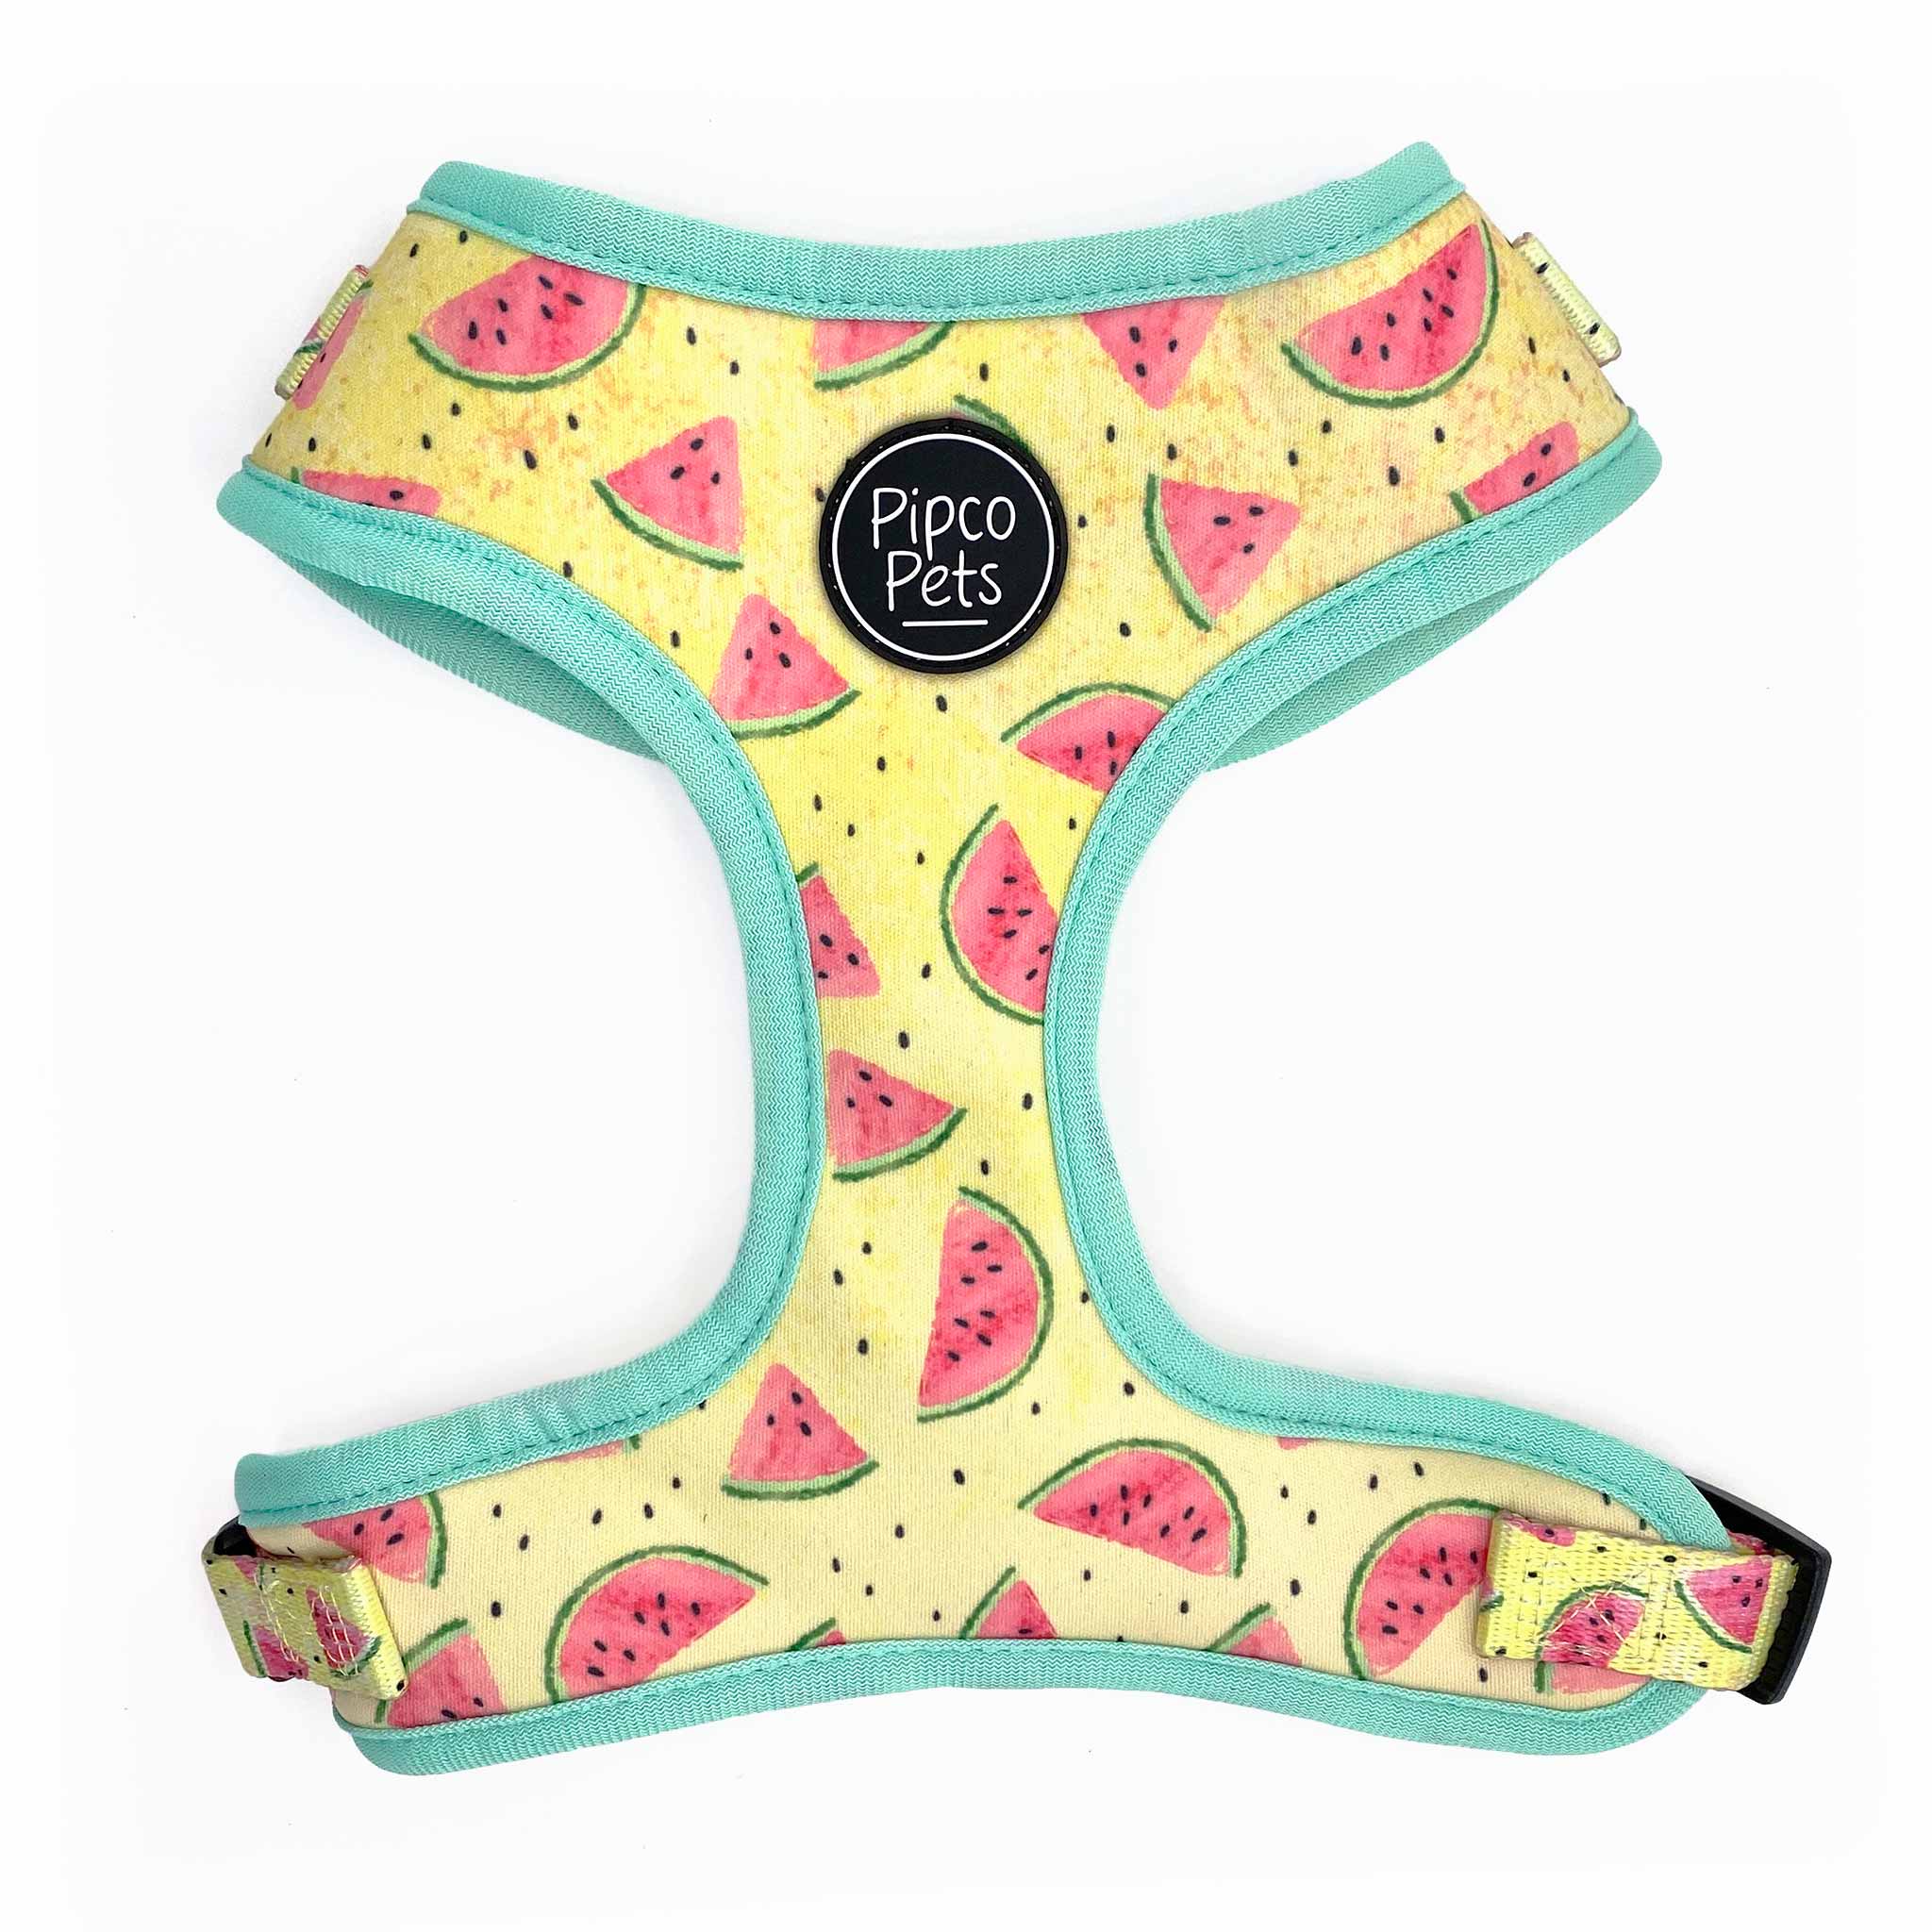 Front view of Pipco Pets adjustable dog harness with Summer Melons watermelon print pattern in yellow  Edit alt text